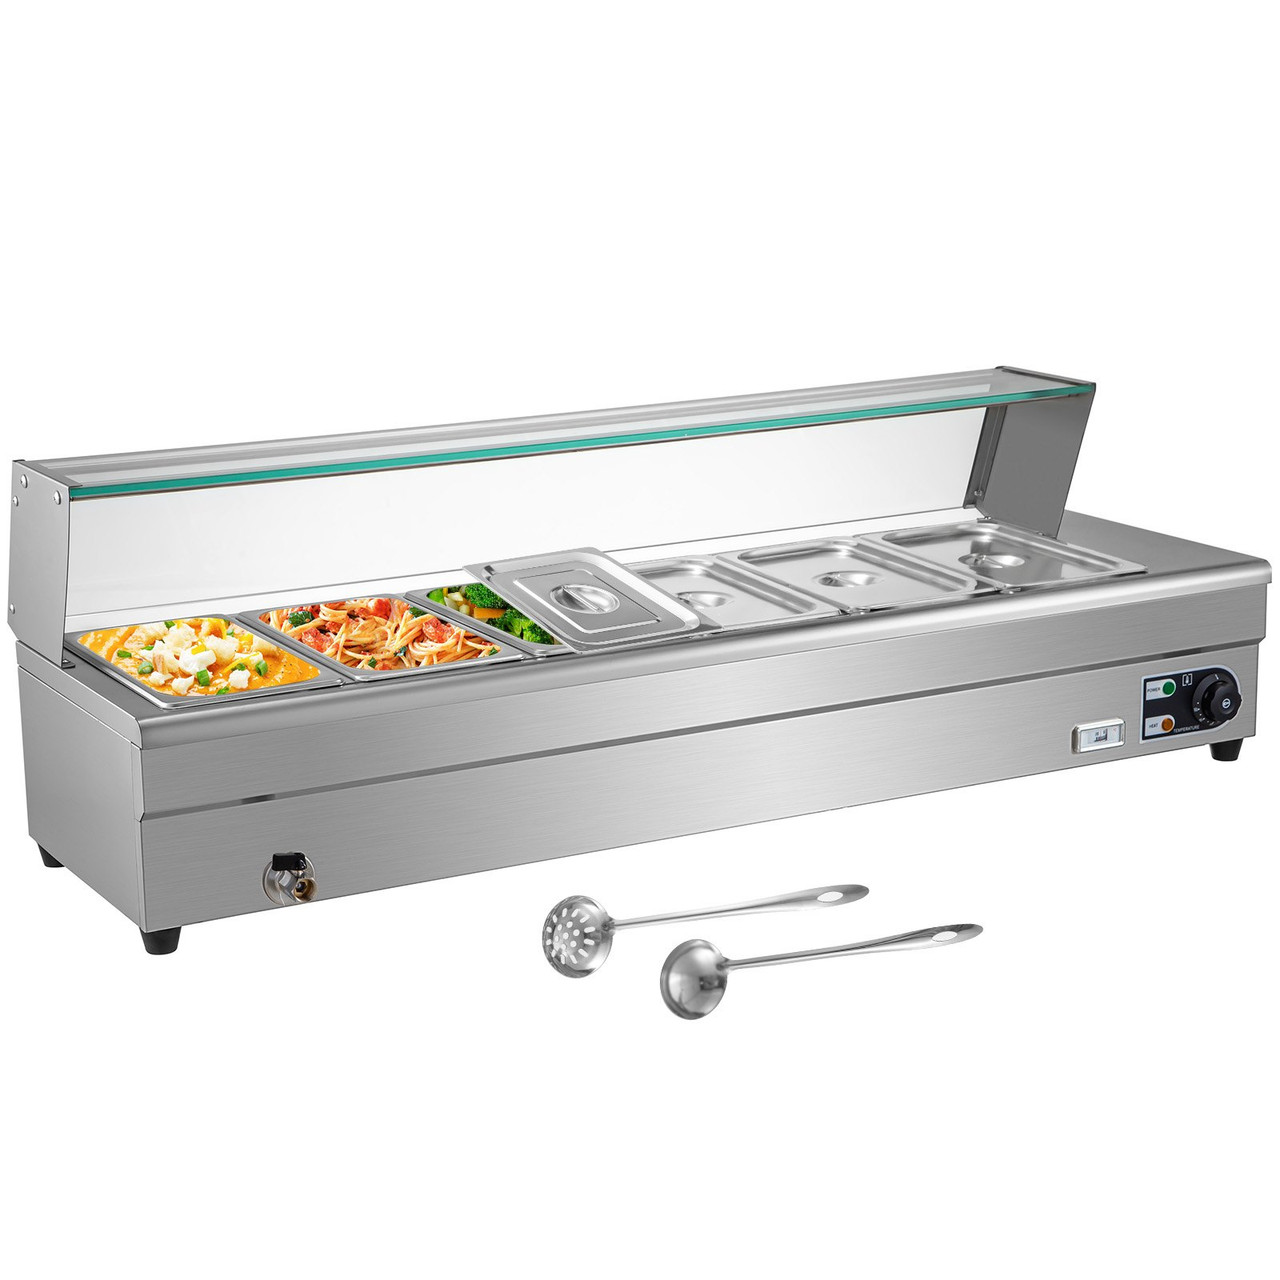 110V Bain Marie Food Warmer 6 Pan x 1/3 GN, Food Grade Stainelss Steel Commercial Food Steam Table 6-Inch Deep, 1500W Electric Countertop Food Warmer 42 Quart with Tempered Glass Shield